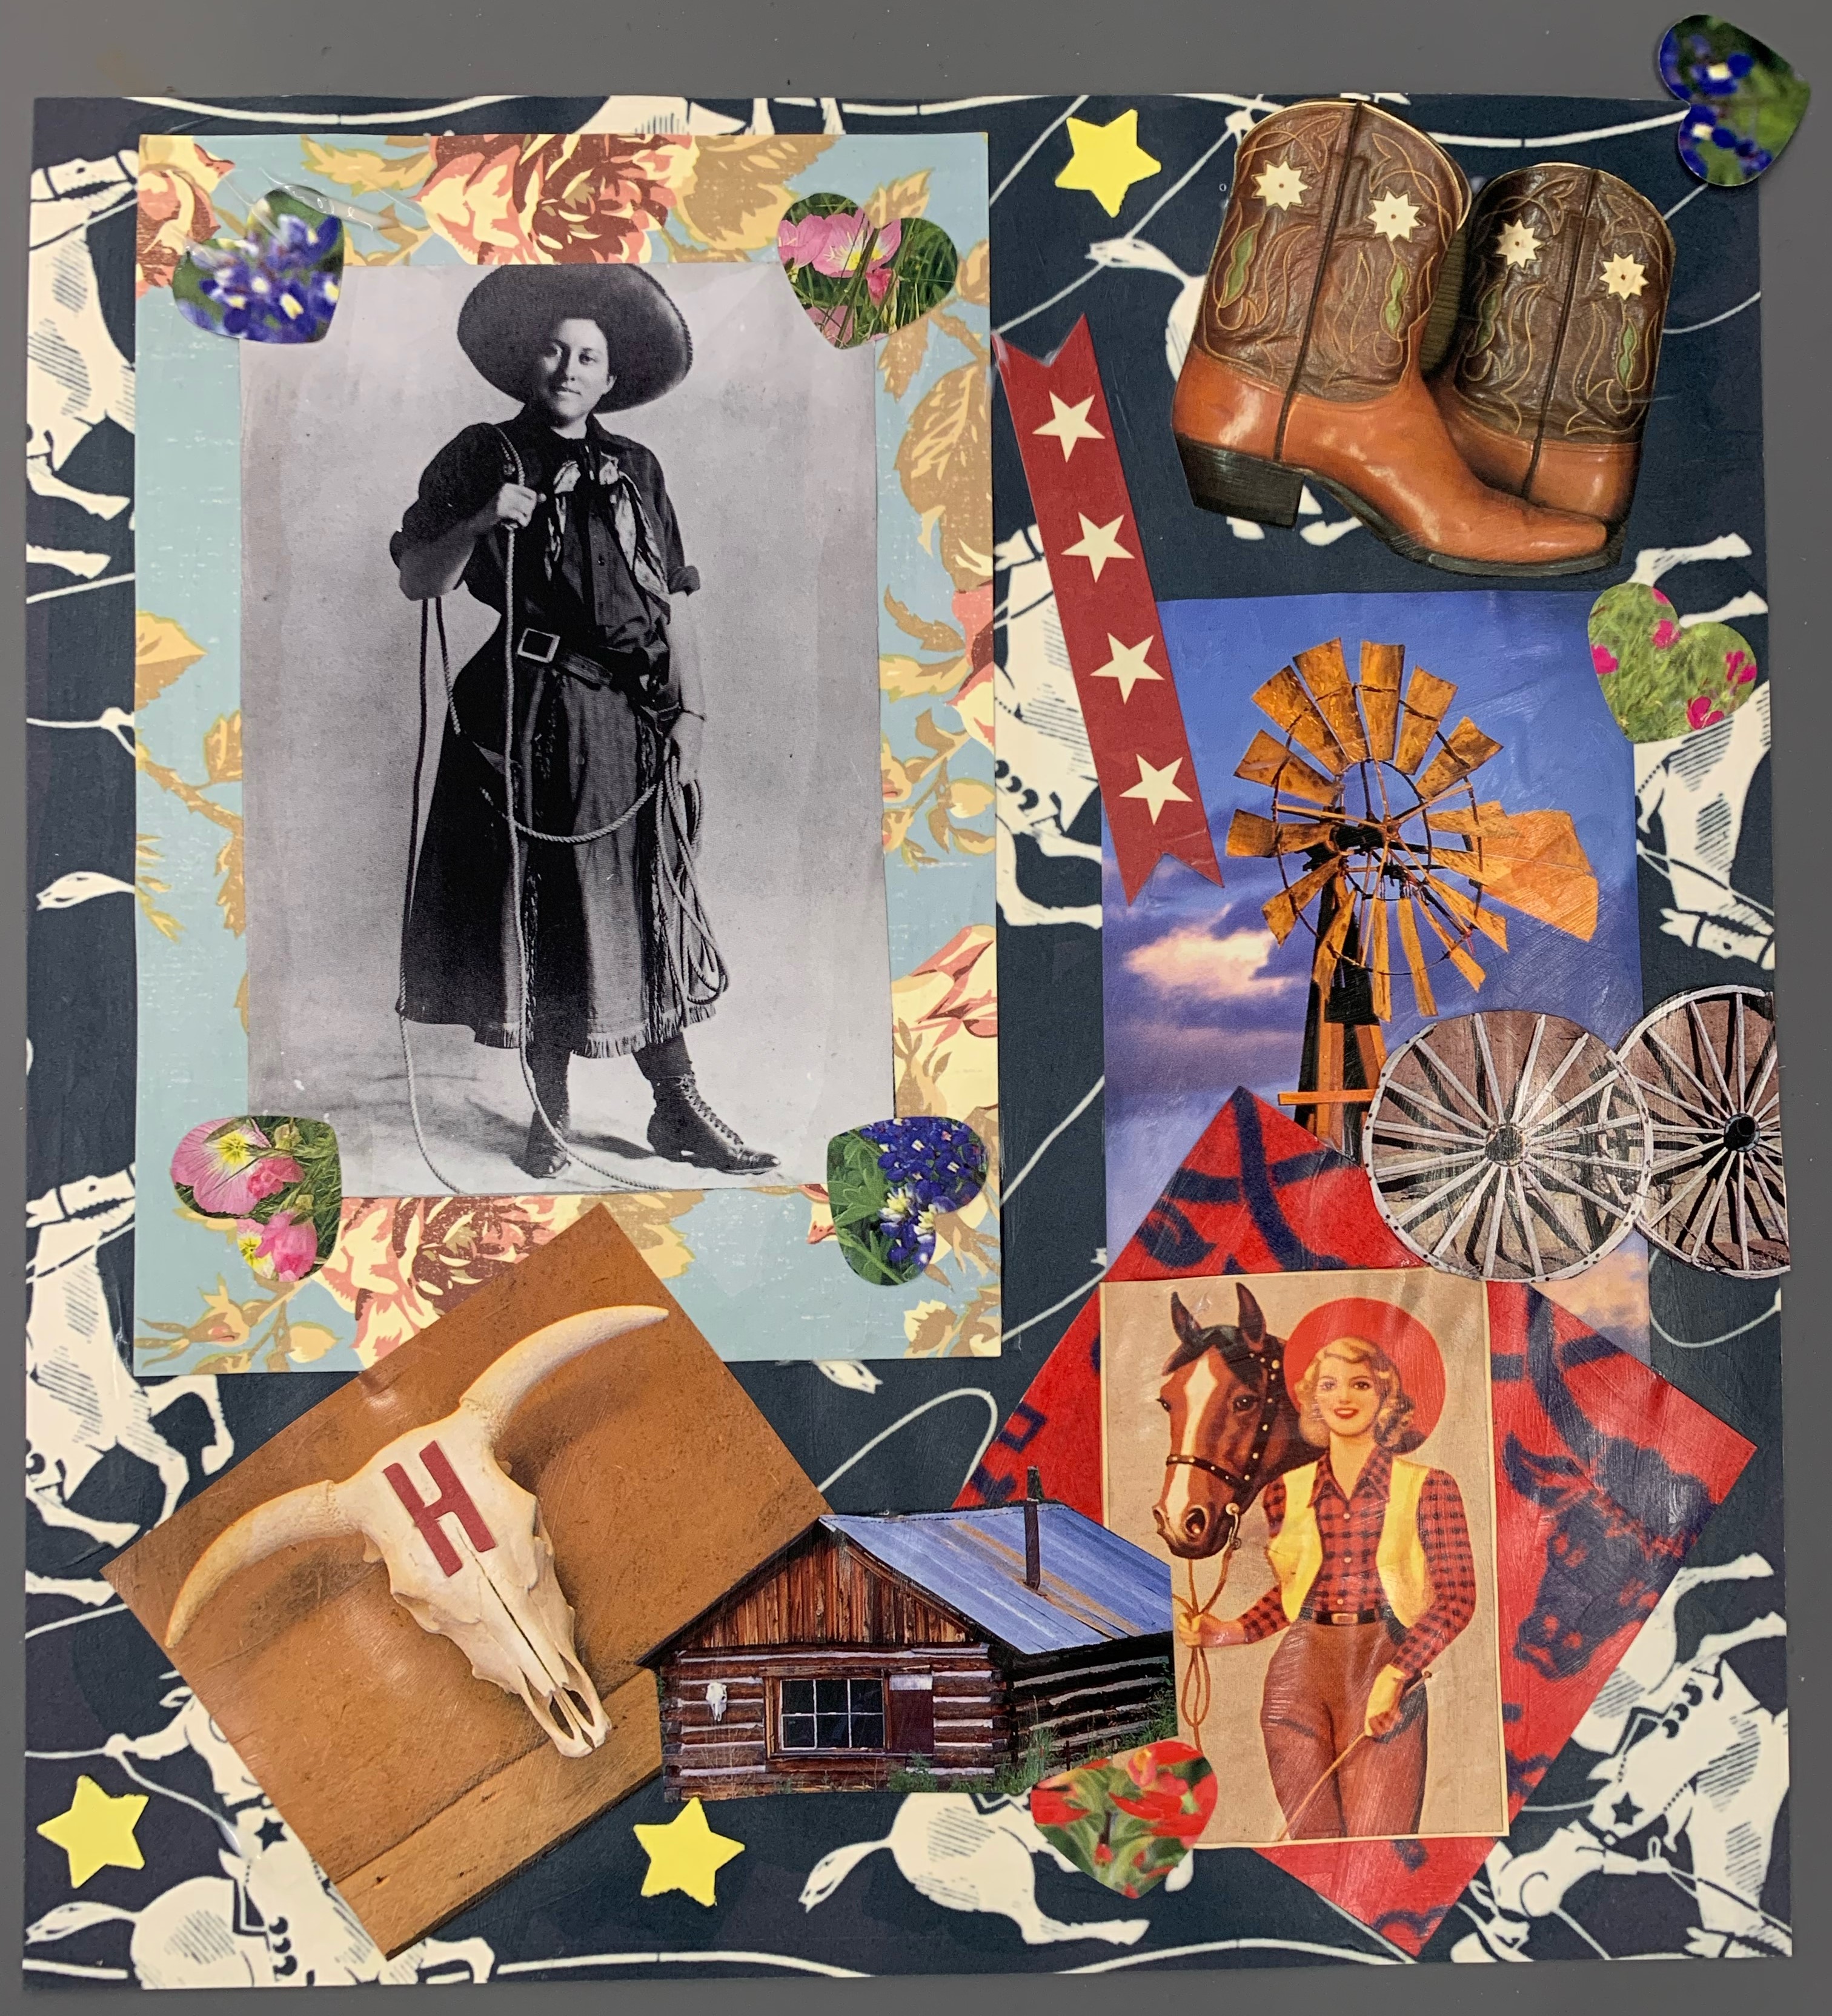 Cowgirl themed collage